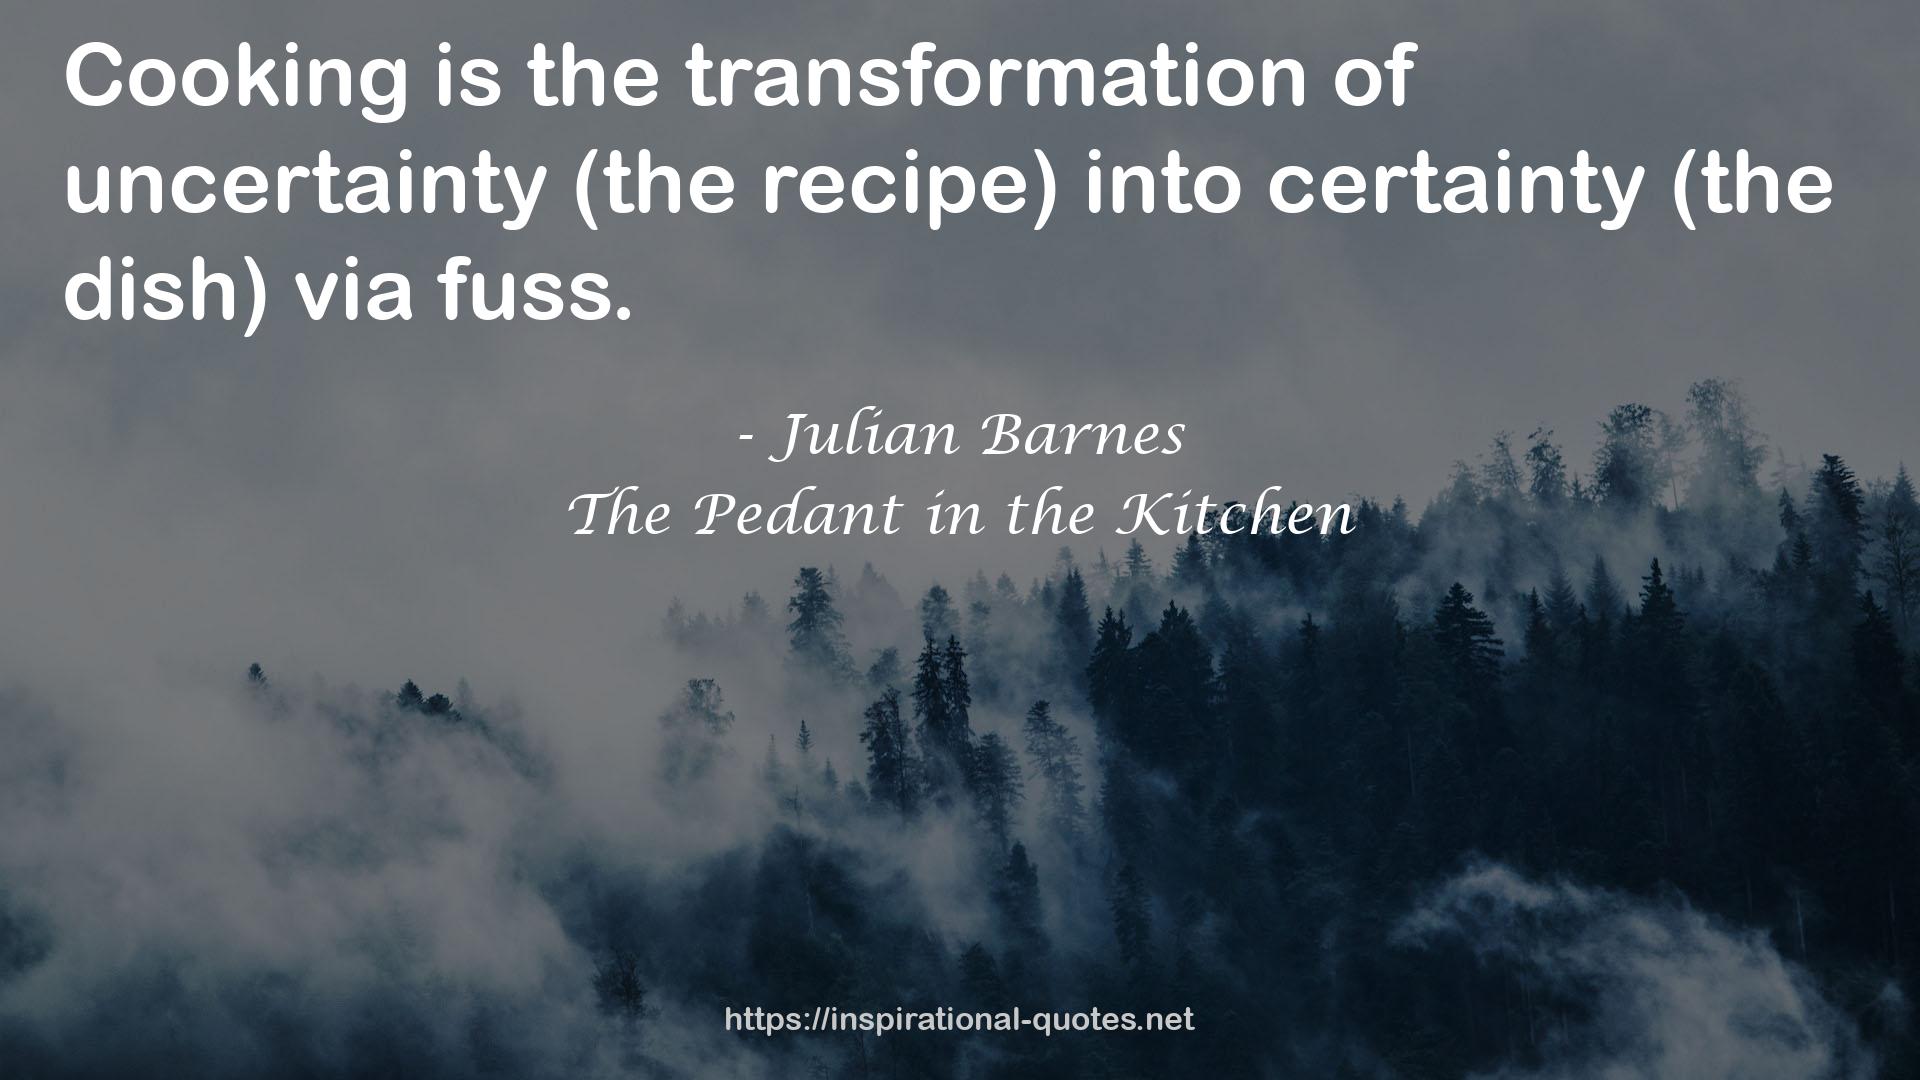 The Pedant in the Kitchen QUOTES